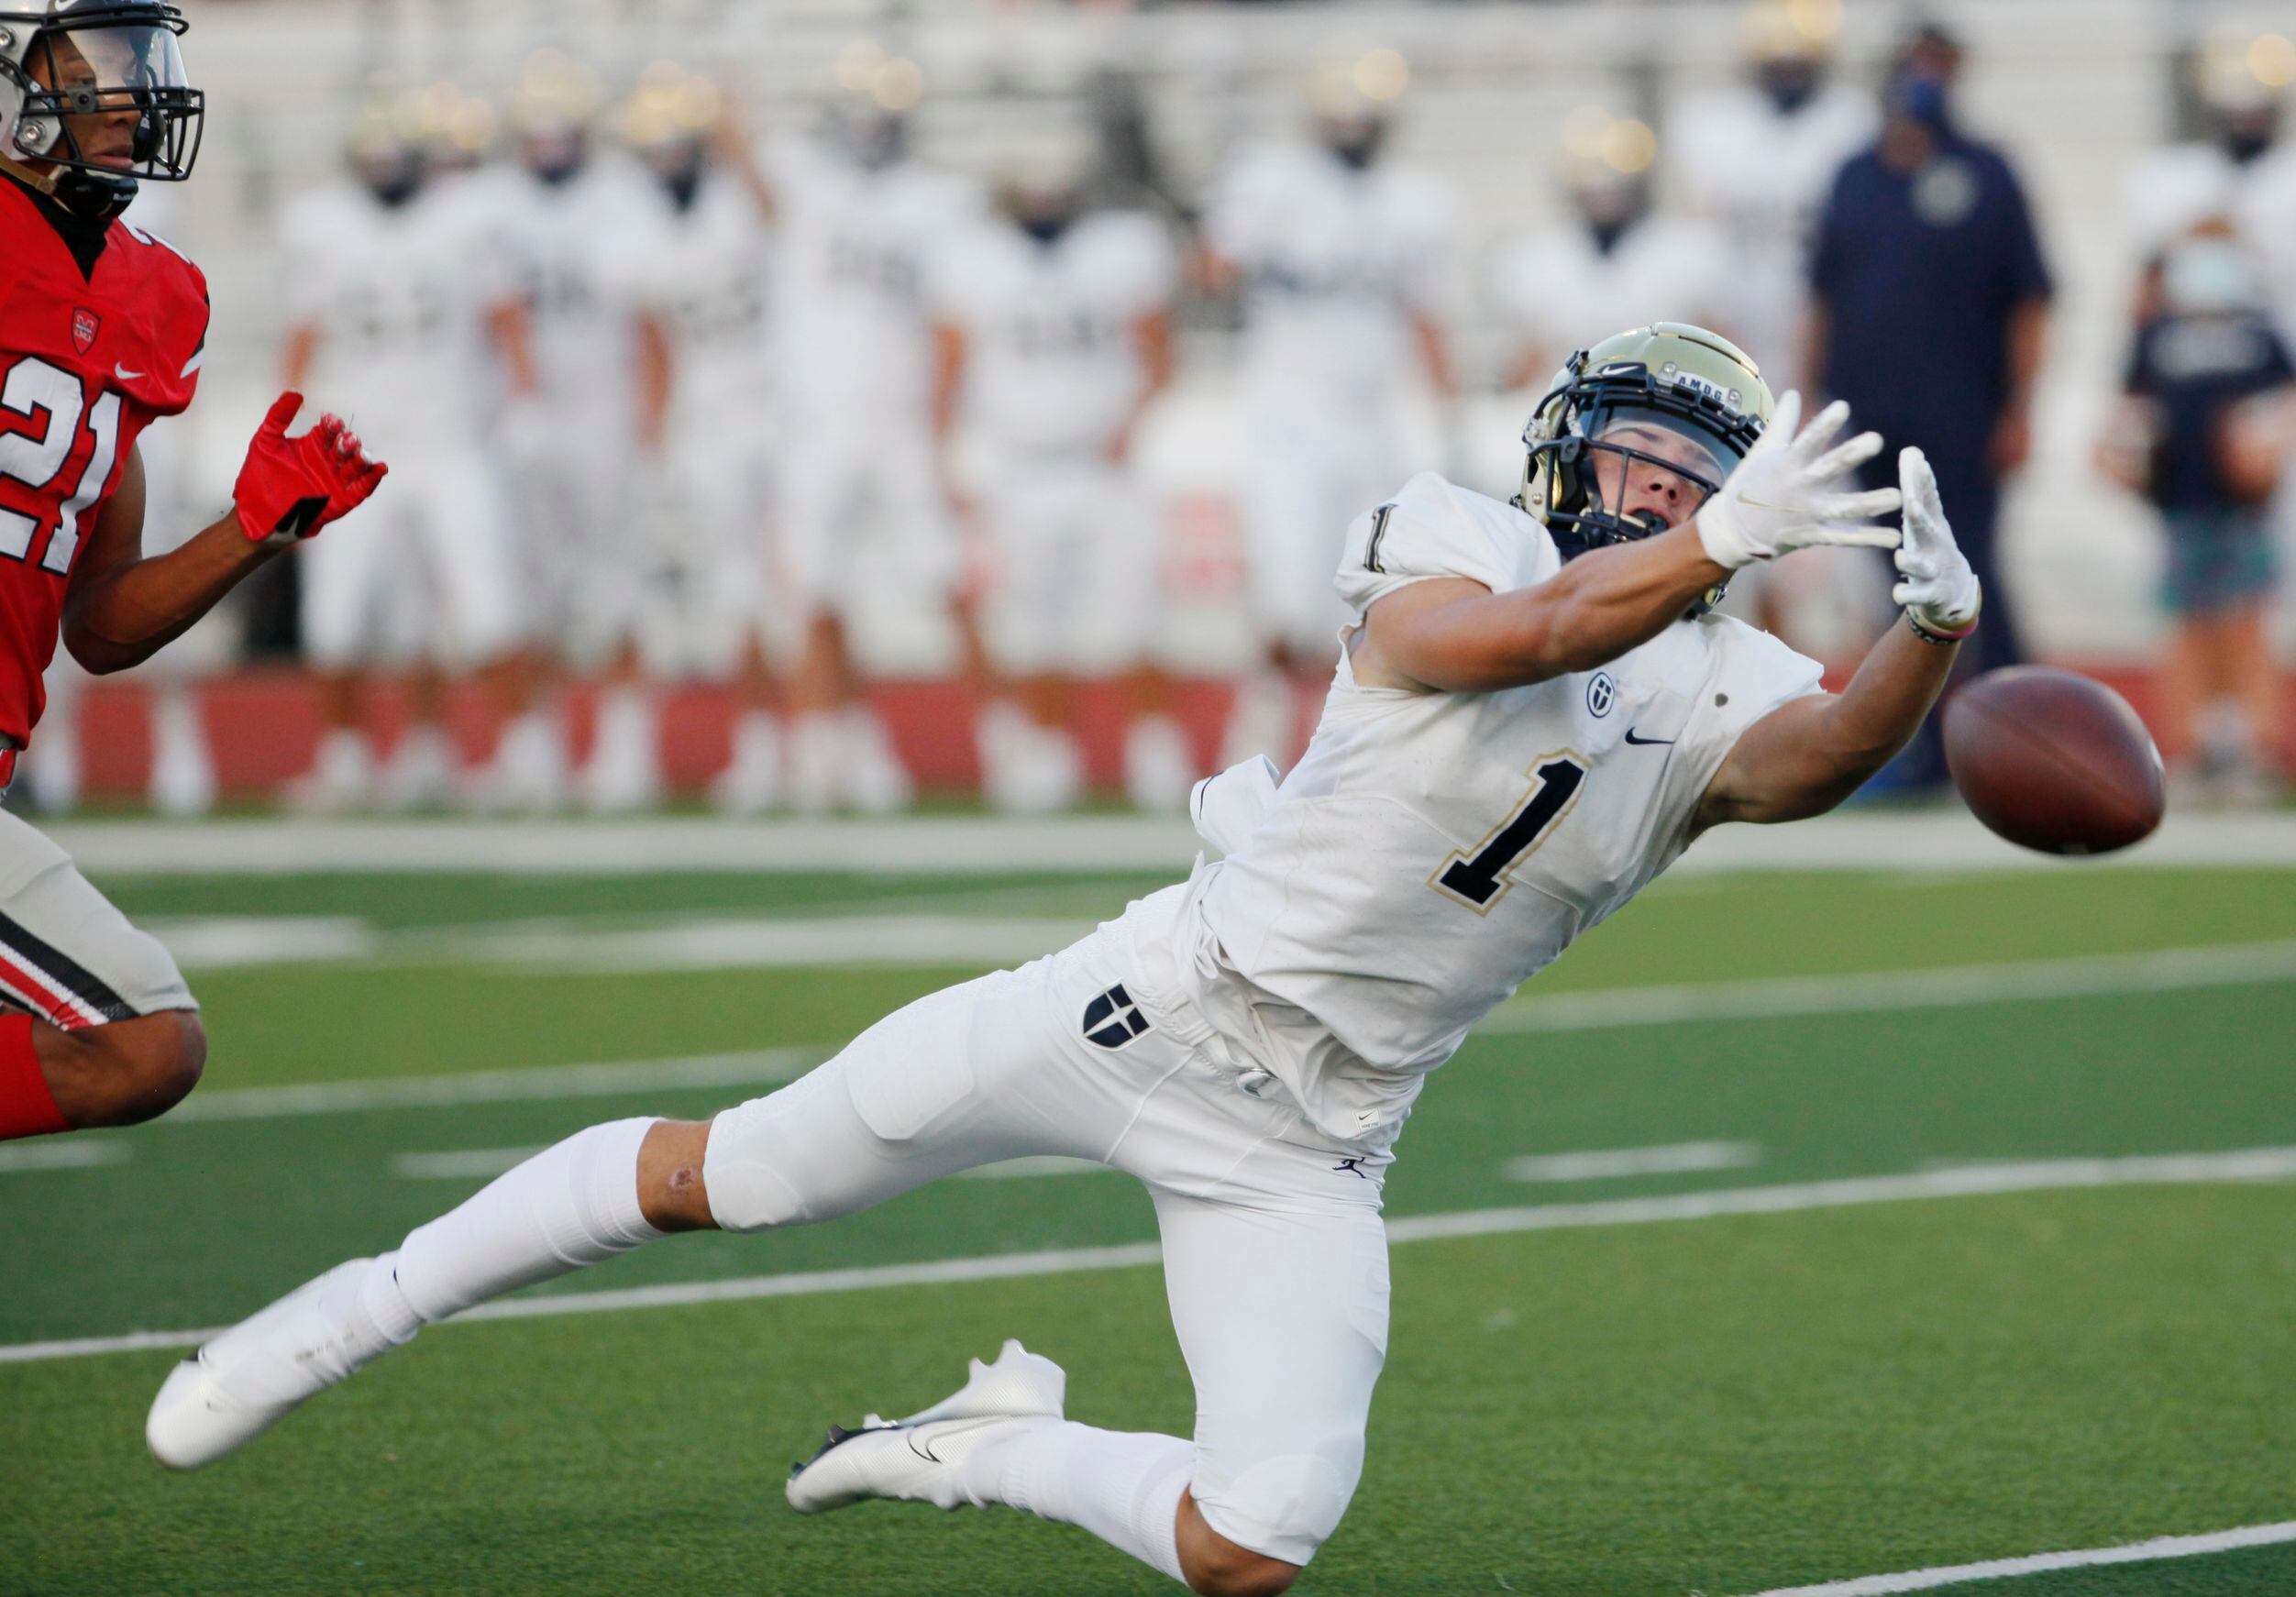 Flower Mound Marcus sophomore Zach Morris (21) chases after Jesuit junior wide receiver...